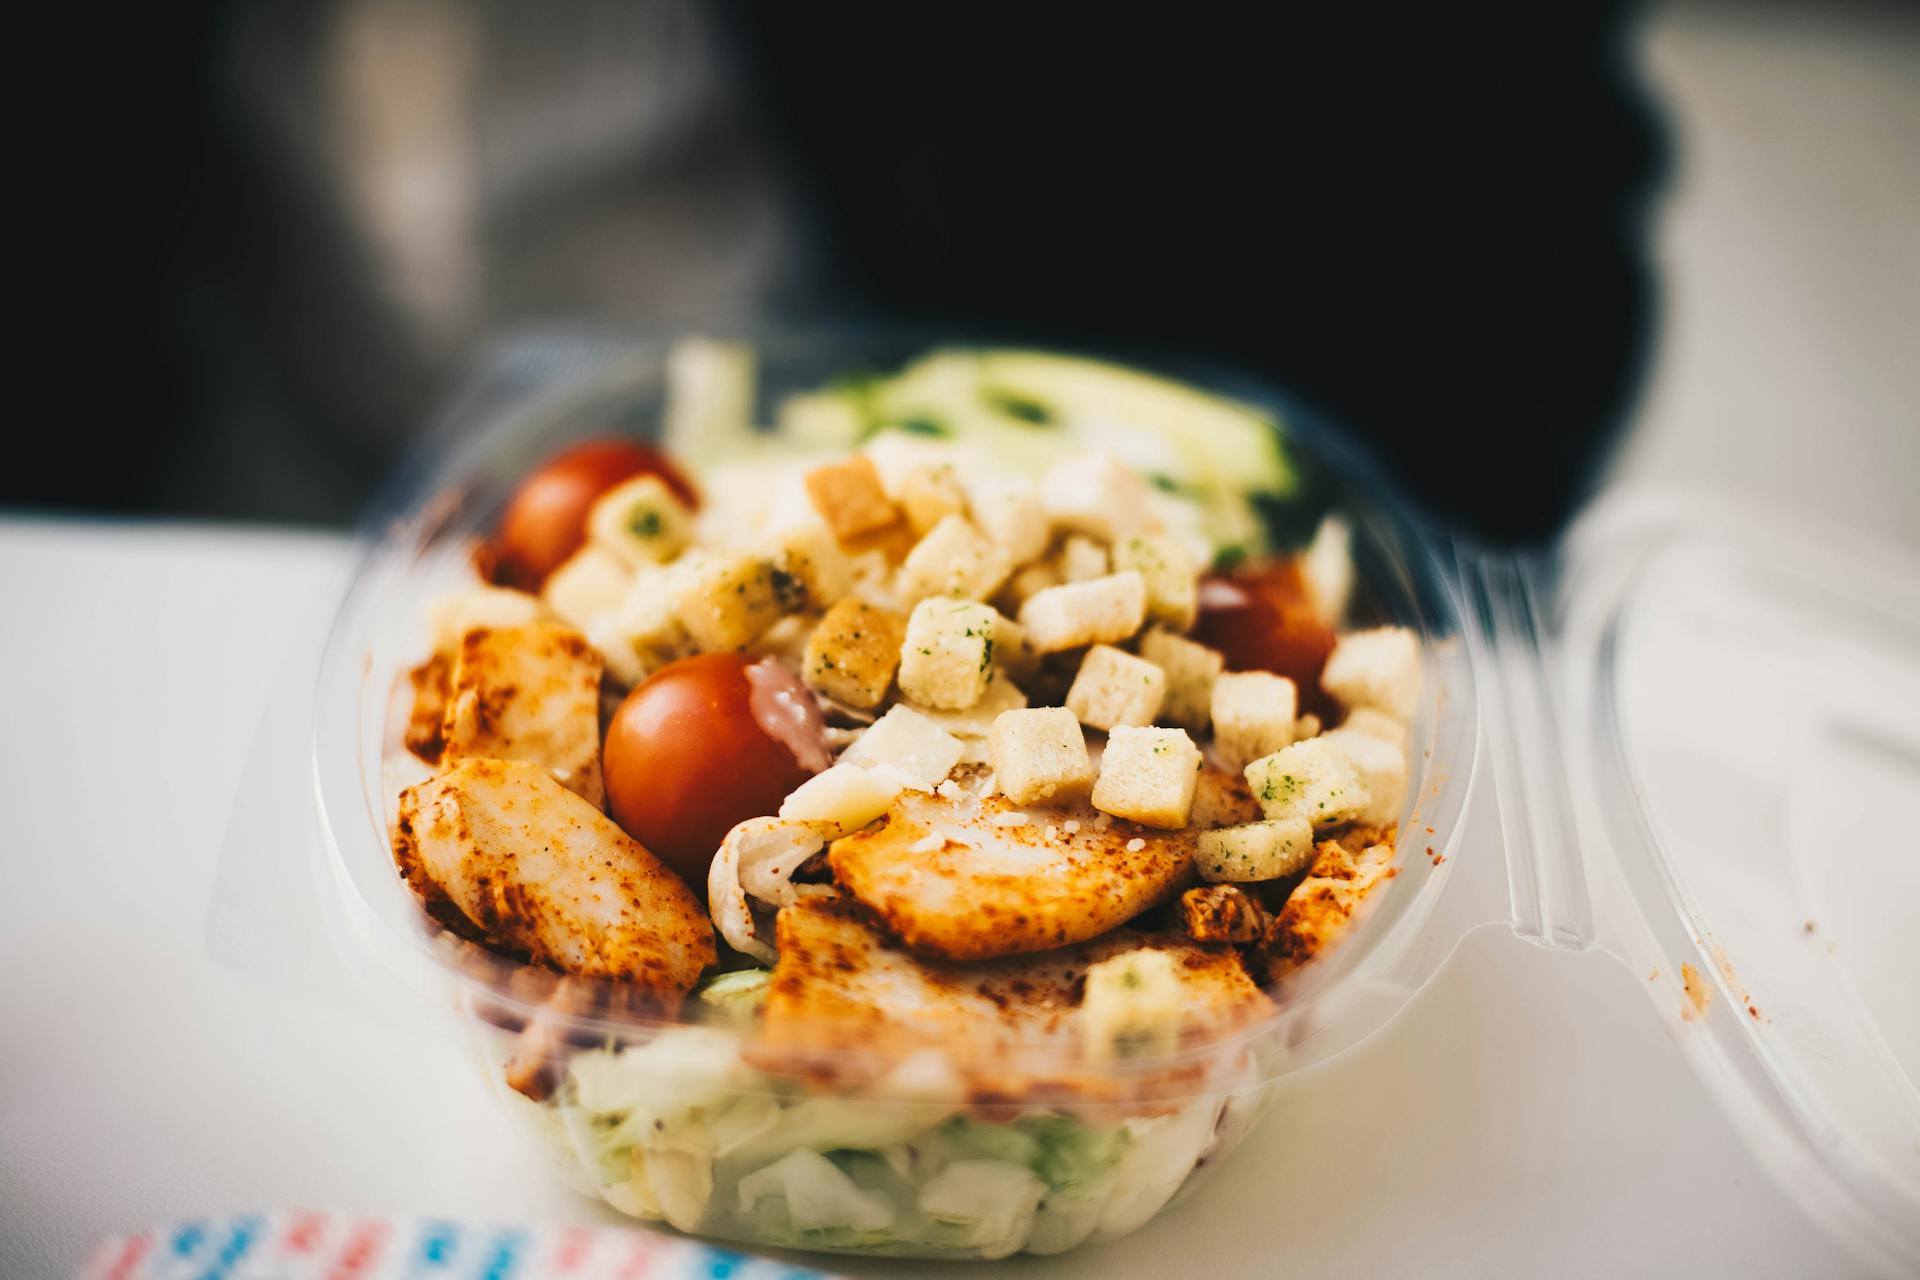 A container of food | Source: Pexels